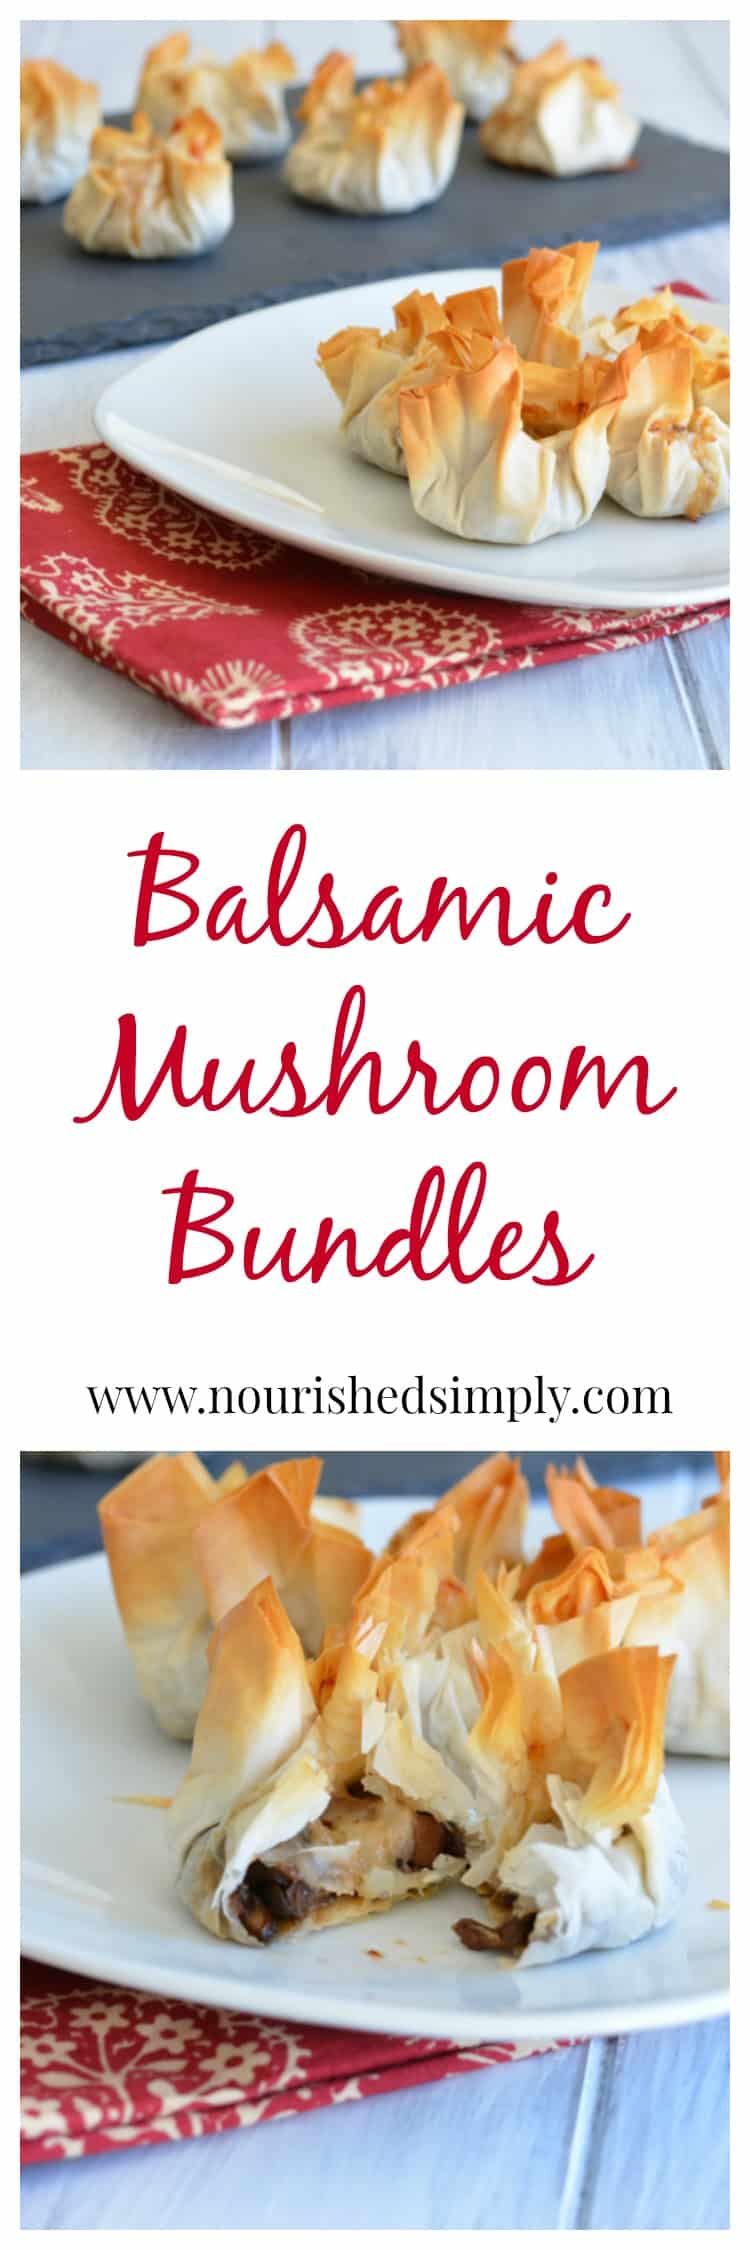 Balsamic Mushroom Bundles, a perfect meatless appetizer to add to your holiday party recipe list.